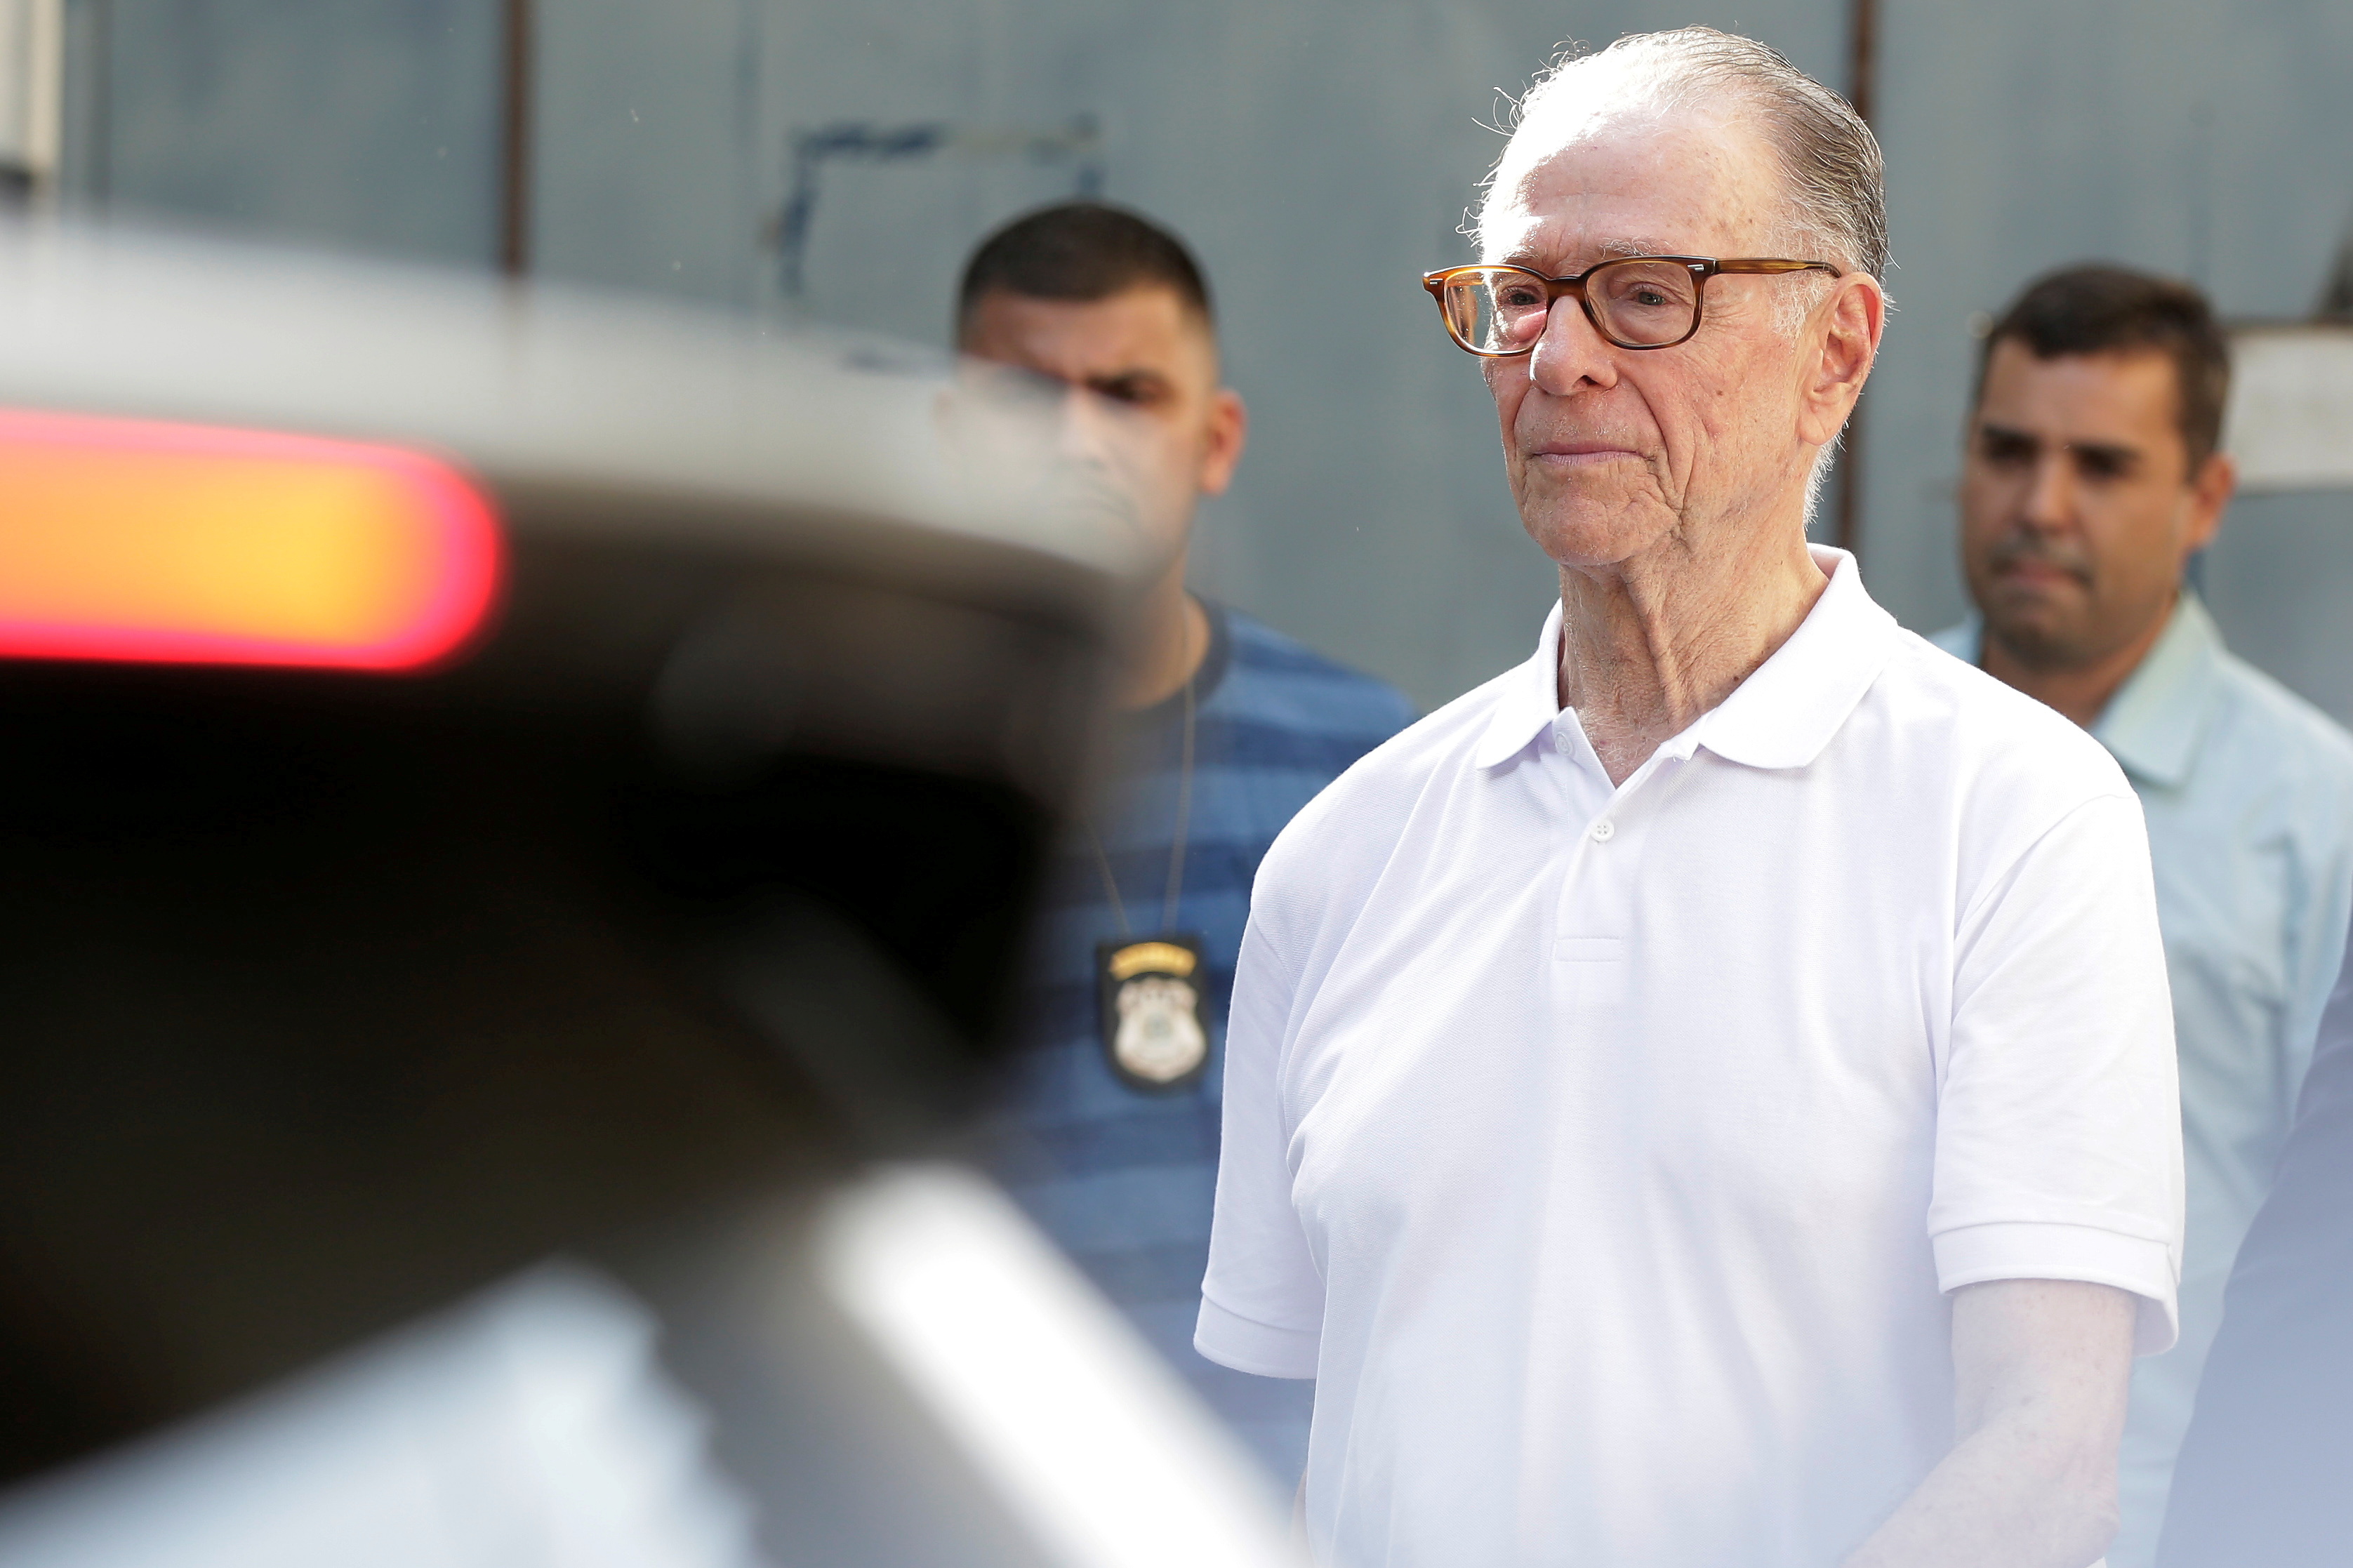 FILE PHOTO: Former Brazil Olympic Committee (COB) President Carlos Arthur Nuzman leaves the public jail Jose Frederico Marques in Rio de Janeiro, Brazil October 20, 2017. REUTERS/Bruno Kelly/File Photo